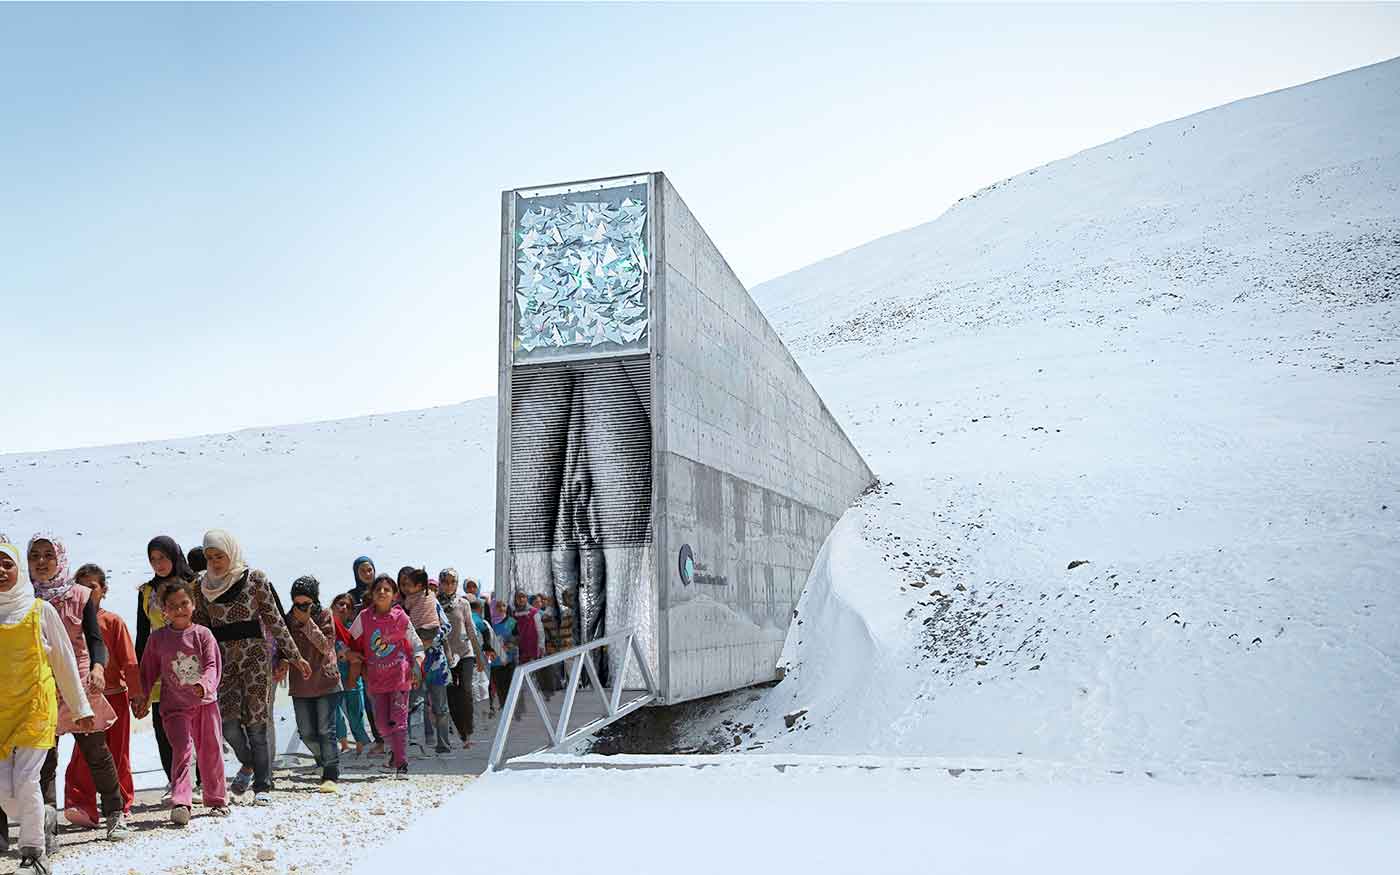 Arctic doomsday seed vault vagina with Syrian refugee withdrawal